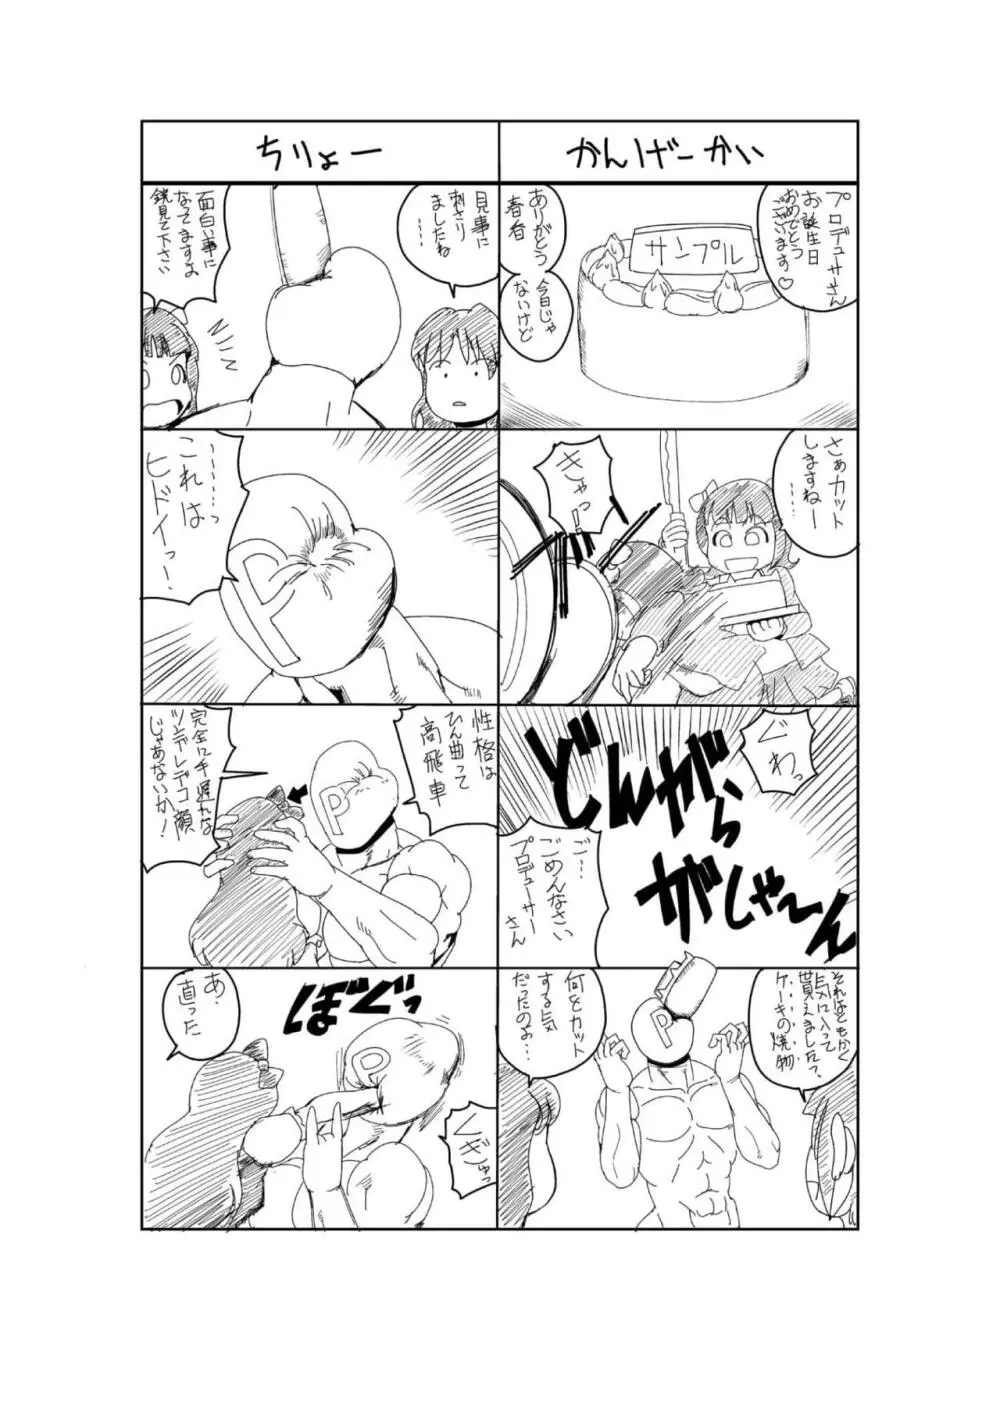 THEあらぶりM@STER3 - page3